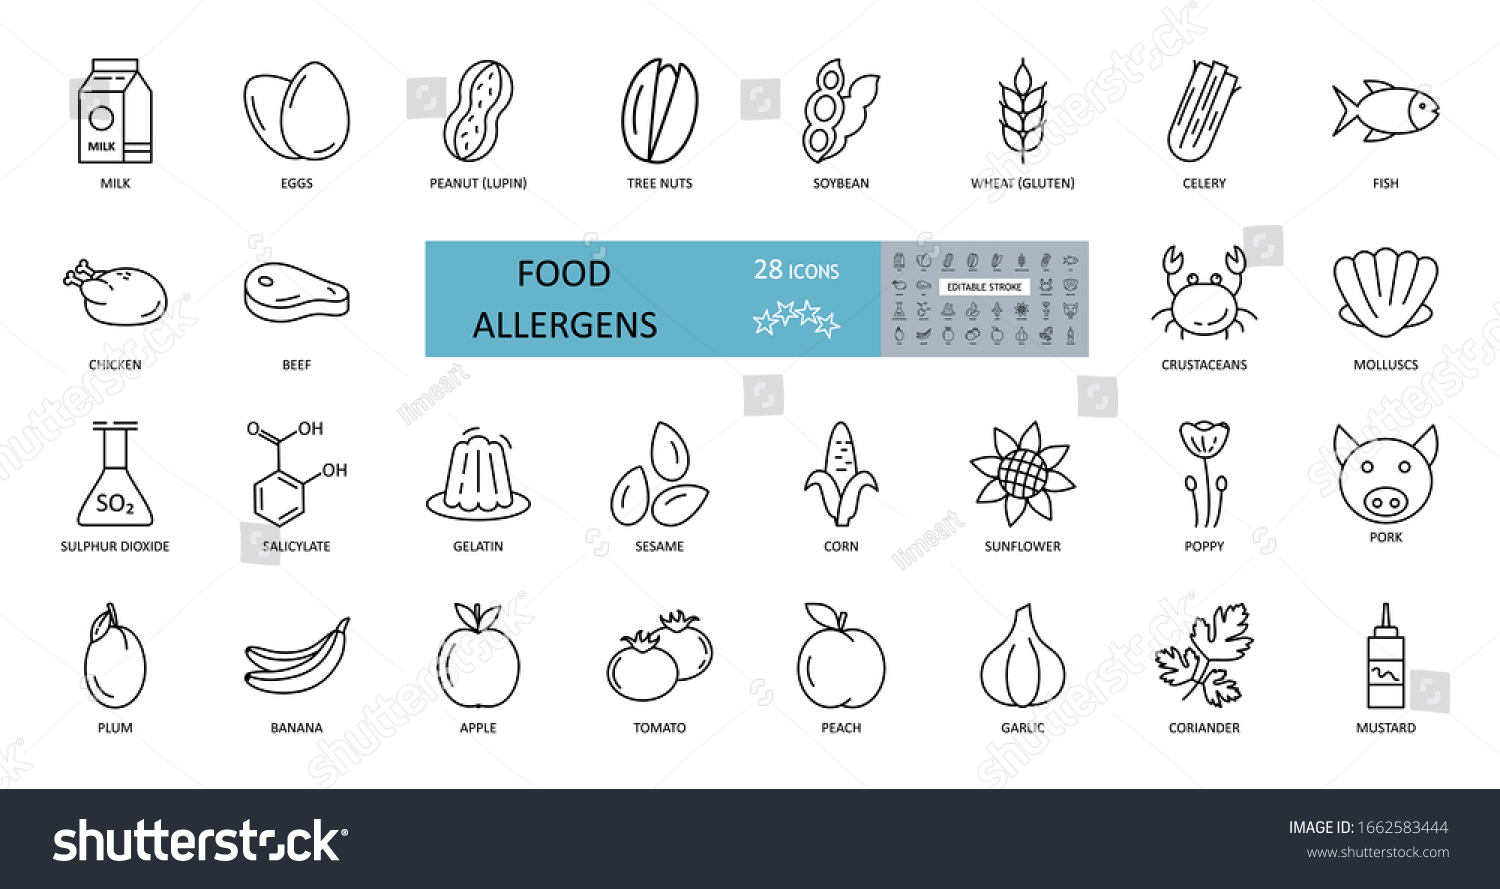 SVG of Food allergens icon. Vector set of 28 icons with editable stroke. The collection contains most allergenic products, such as gluten, fish, eggs, shellfish, peanuts, lupine, soy, celery, milk, tree nuts svg